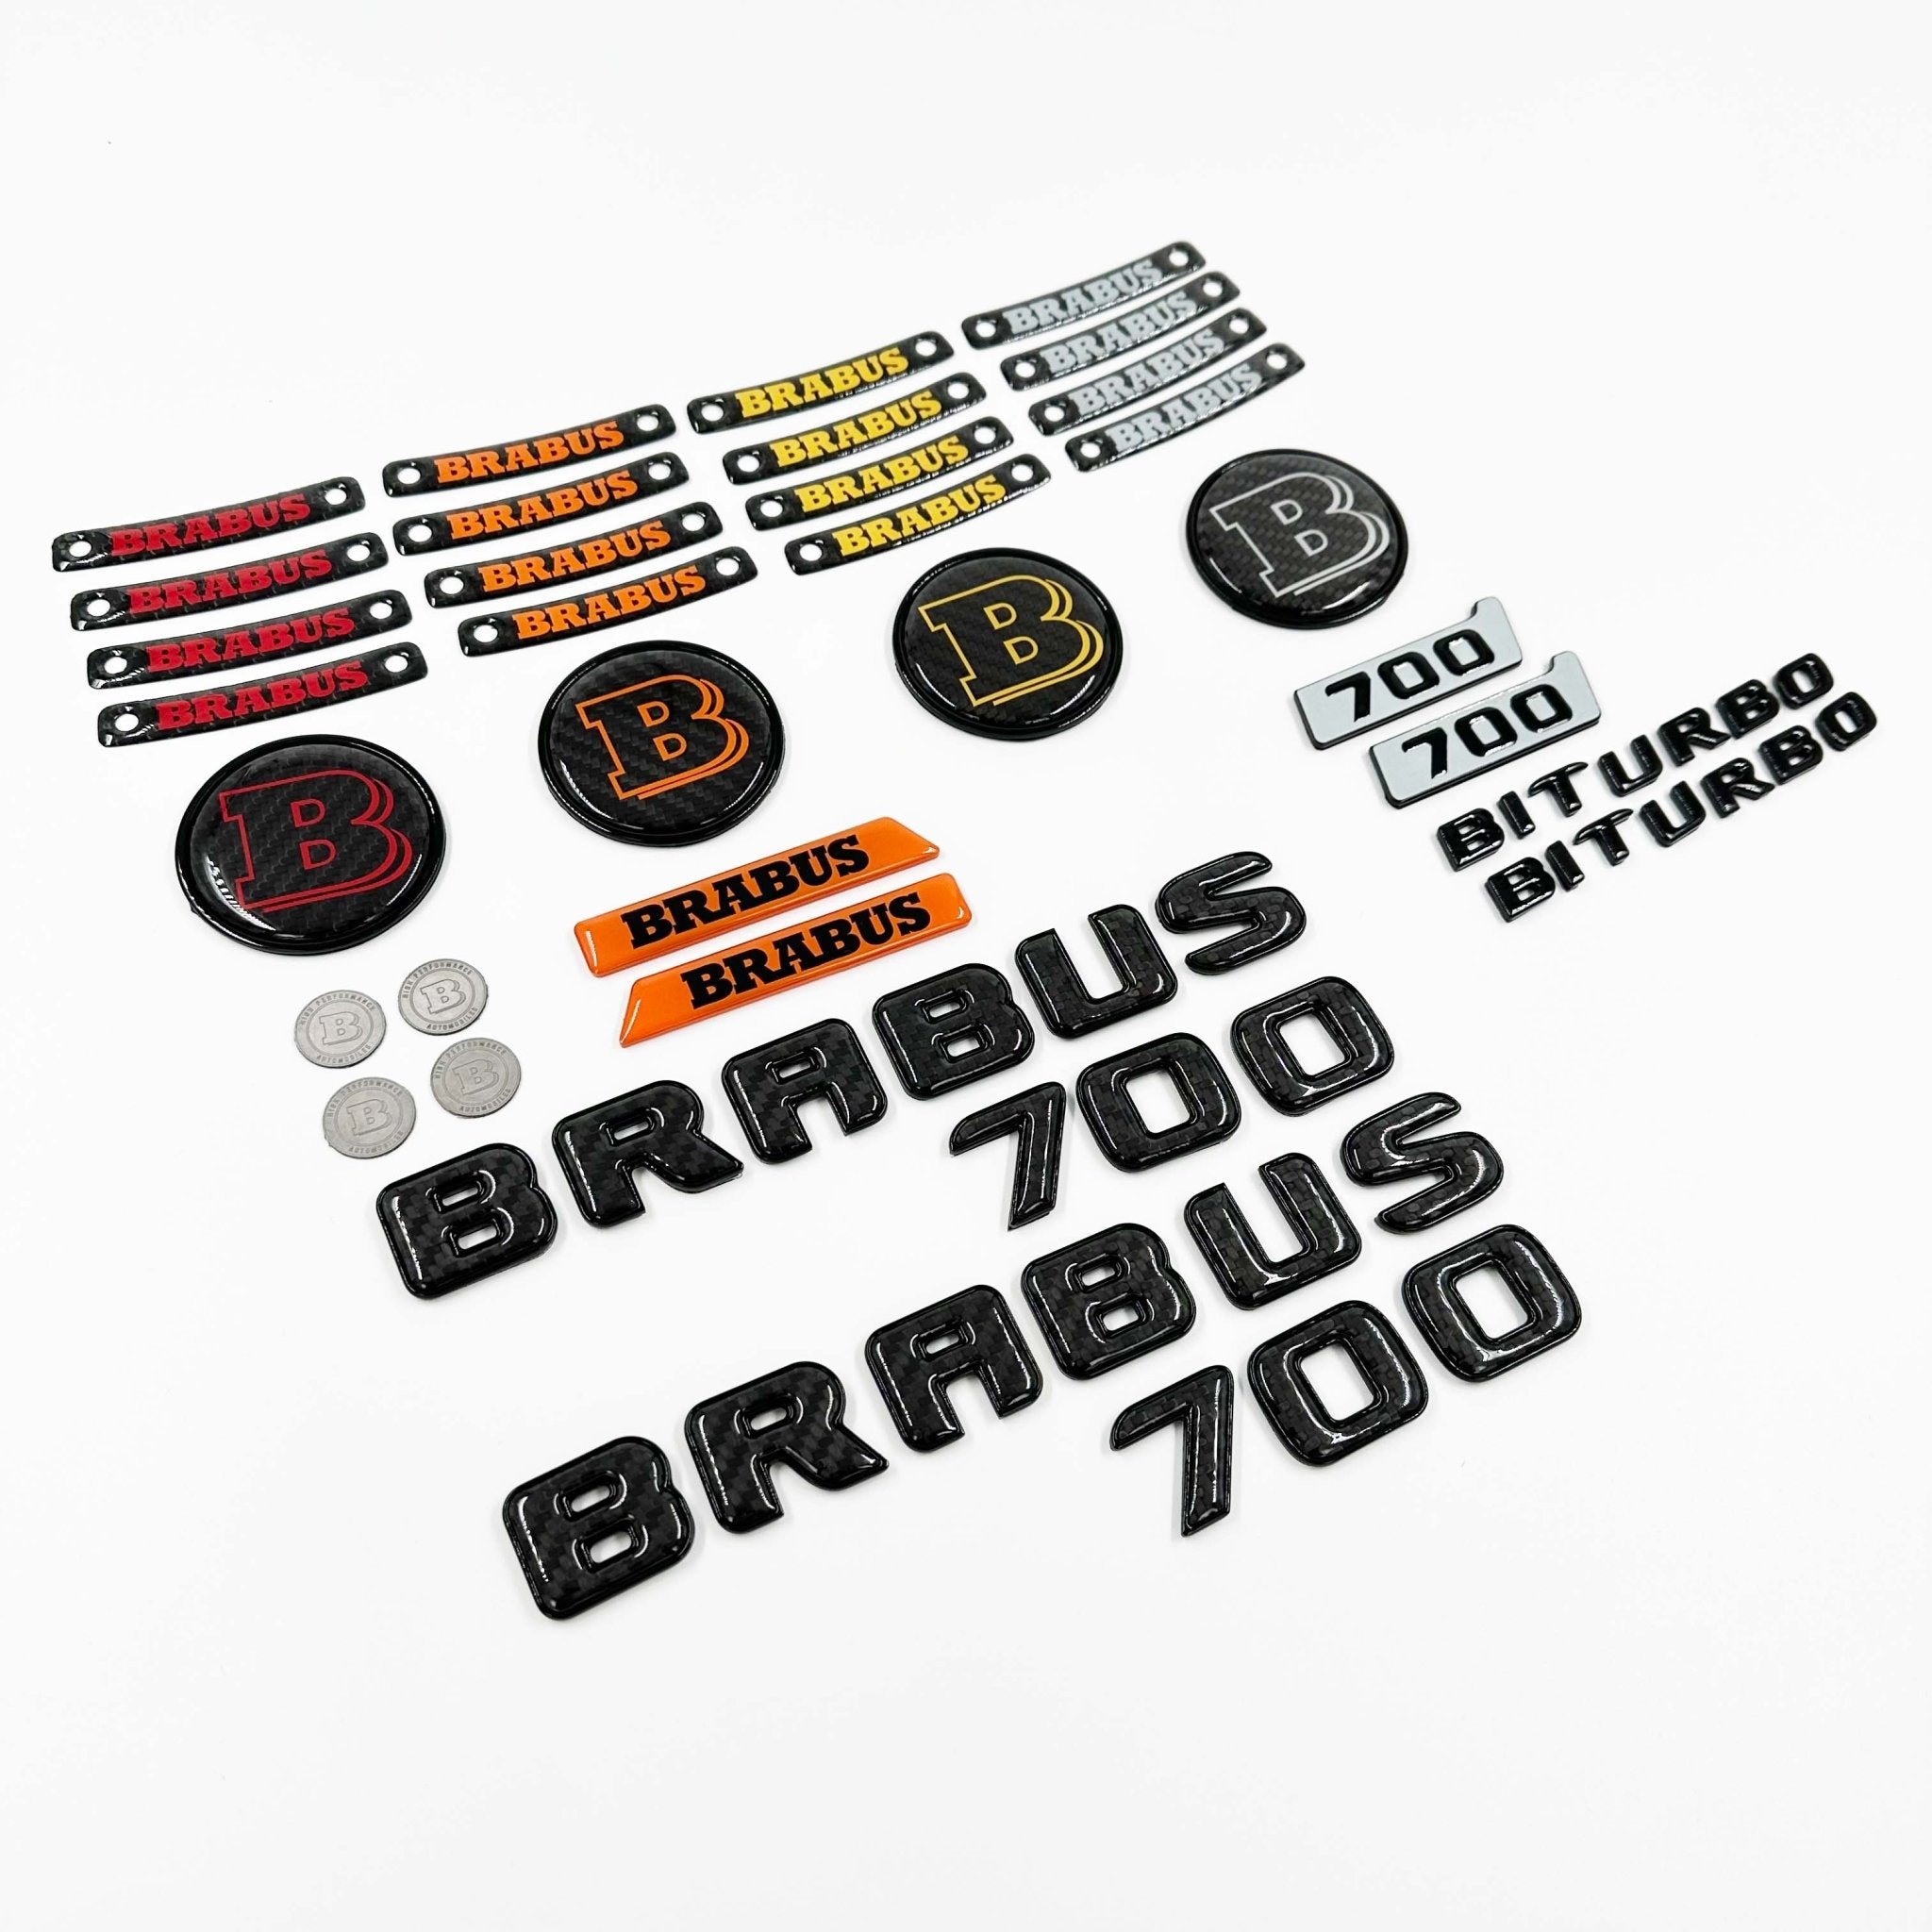 Customizing a Mercedes with Brabus Badges by Kubay Design: A Stunning Transformation!